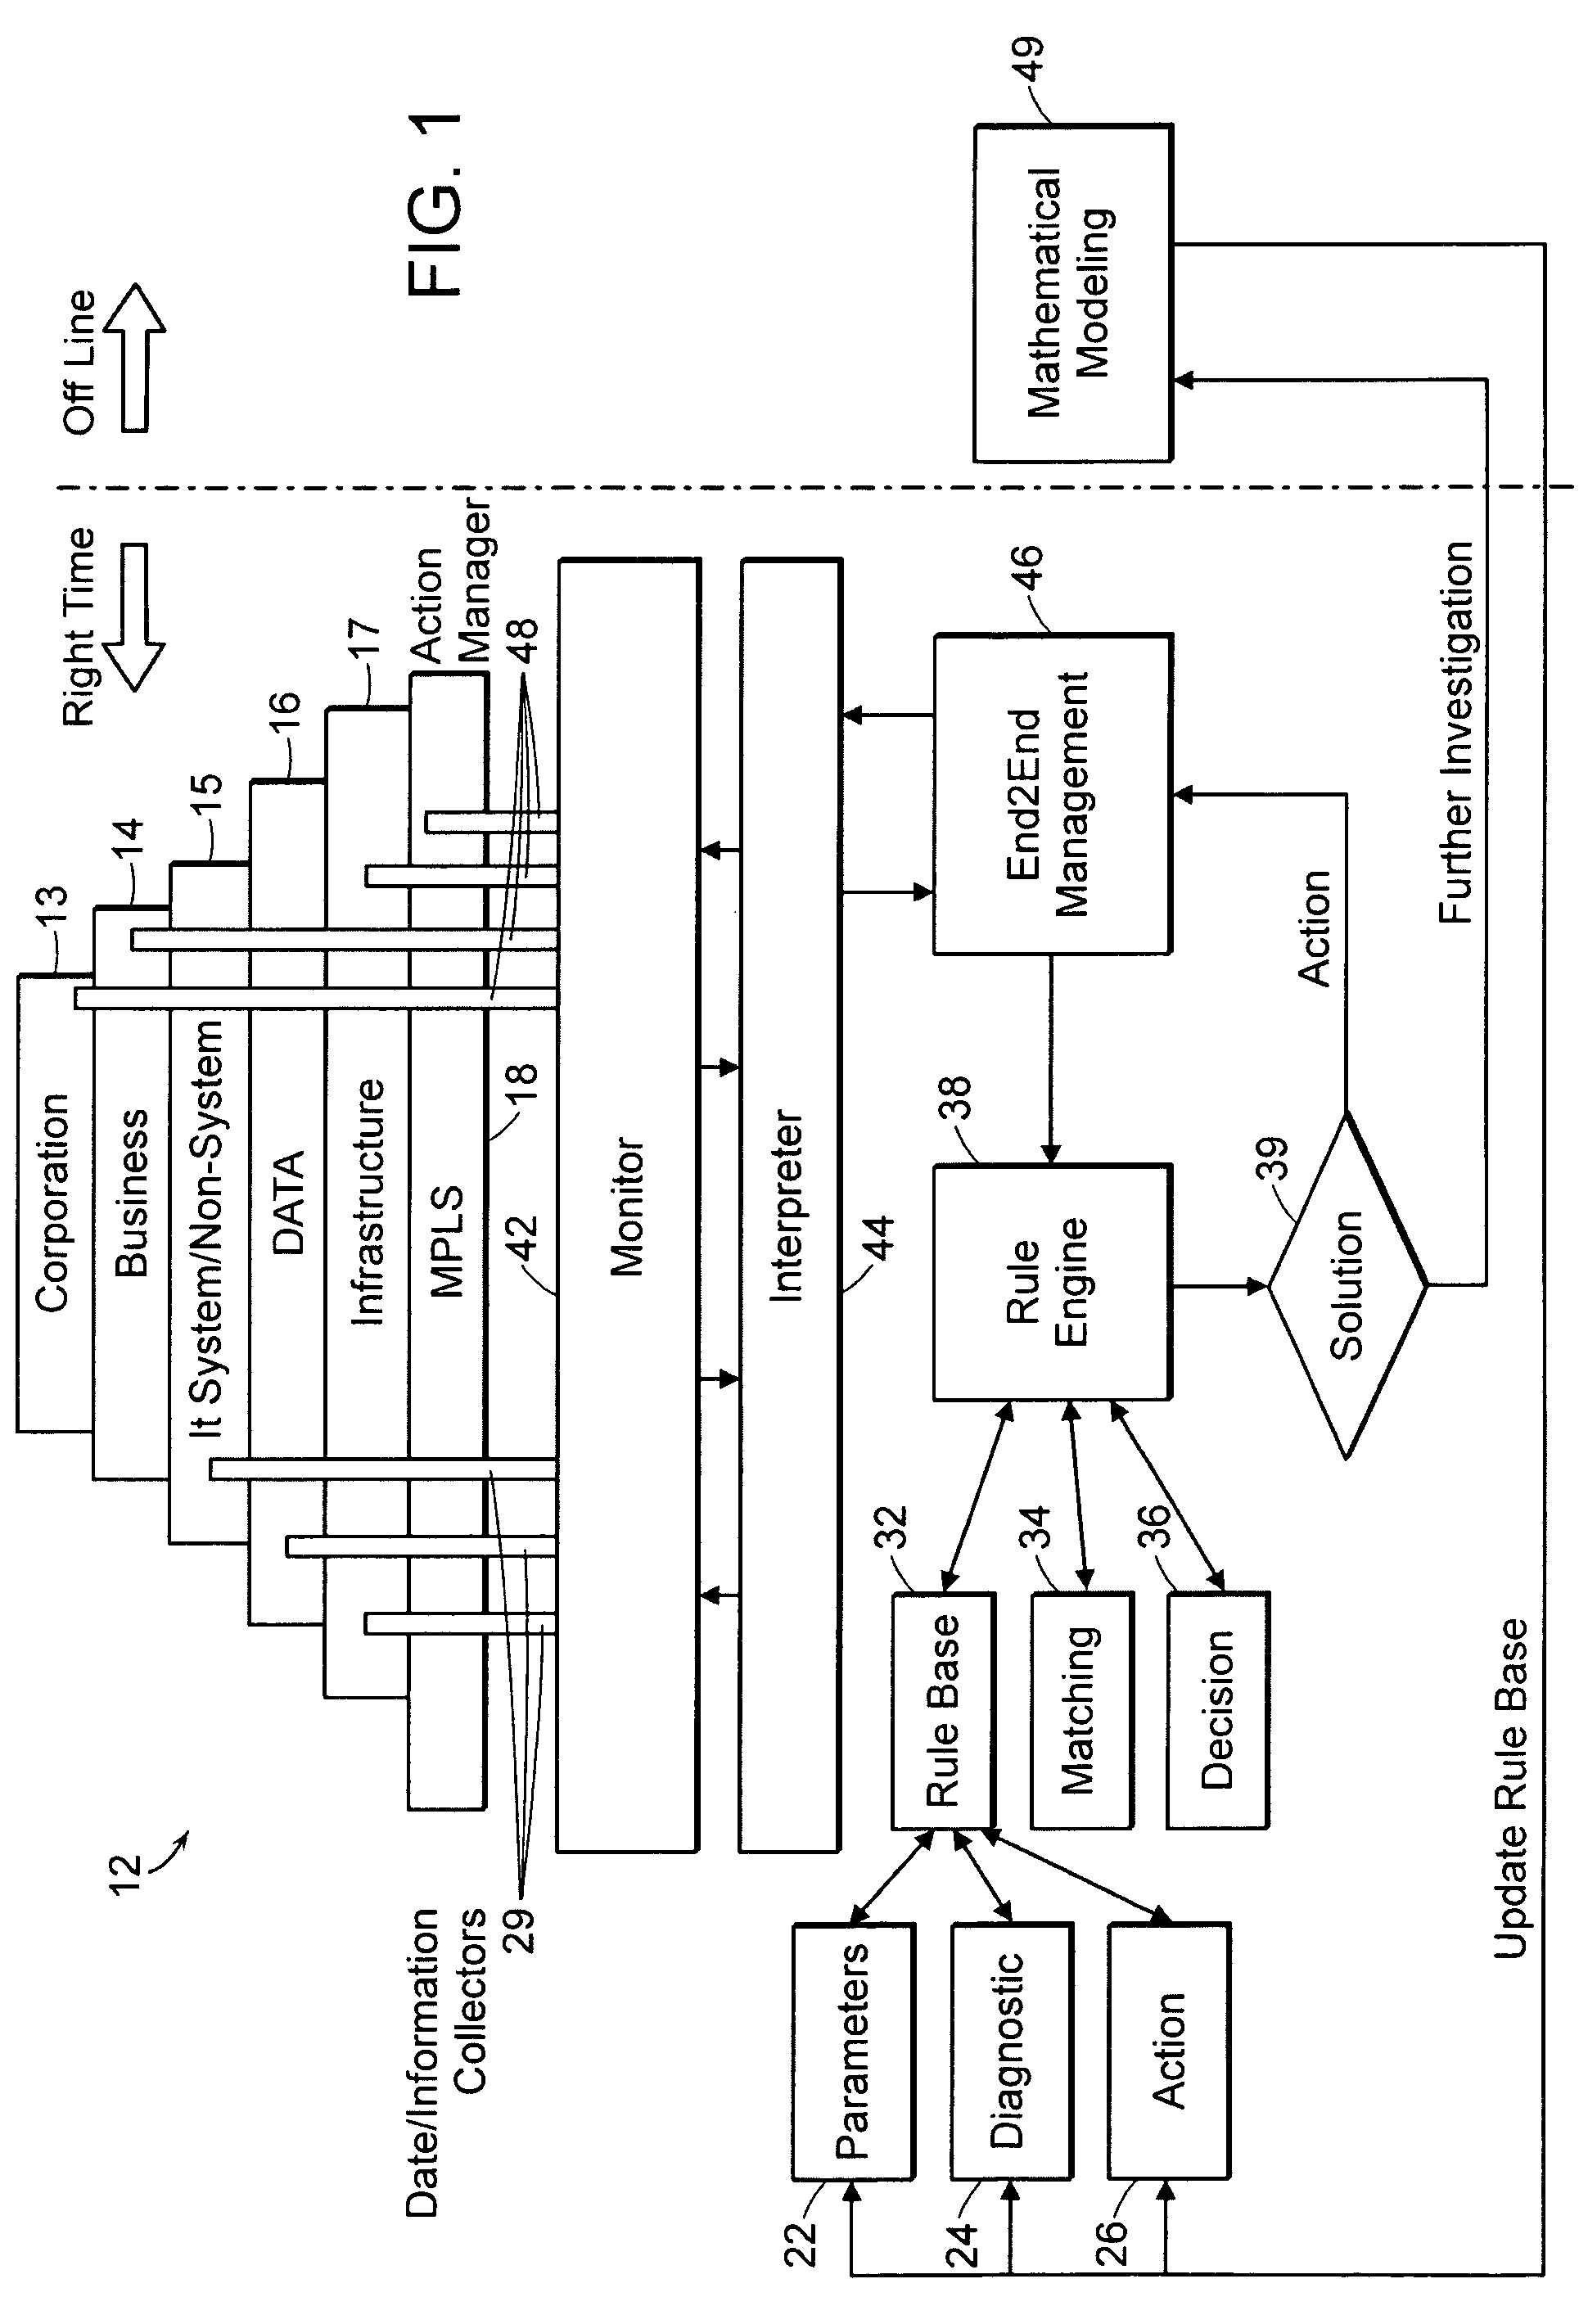 Automated system and method for service and cost architecture modeling of enterprise systems